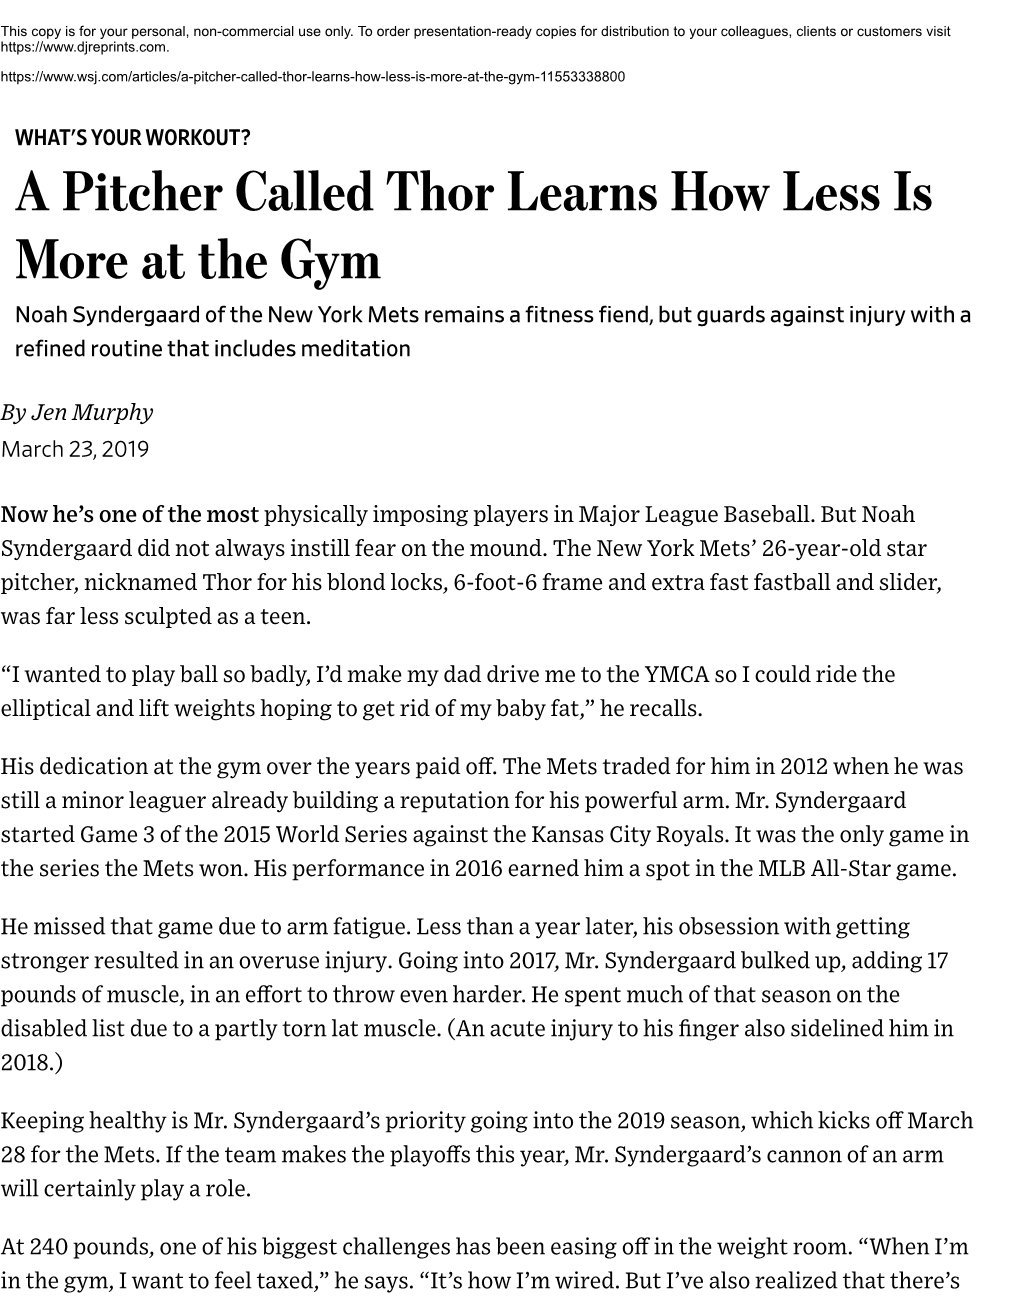 A Pitcher Called Thor Learns How Less Is More at The